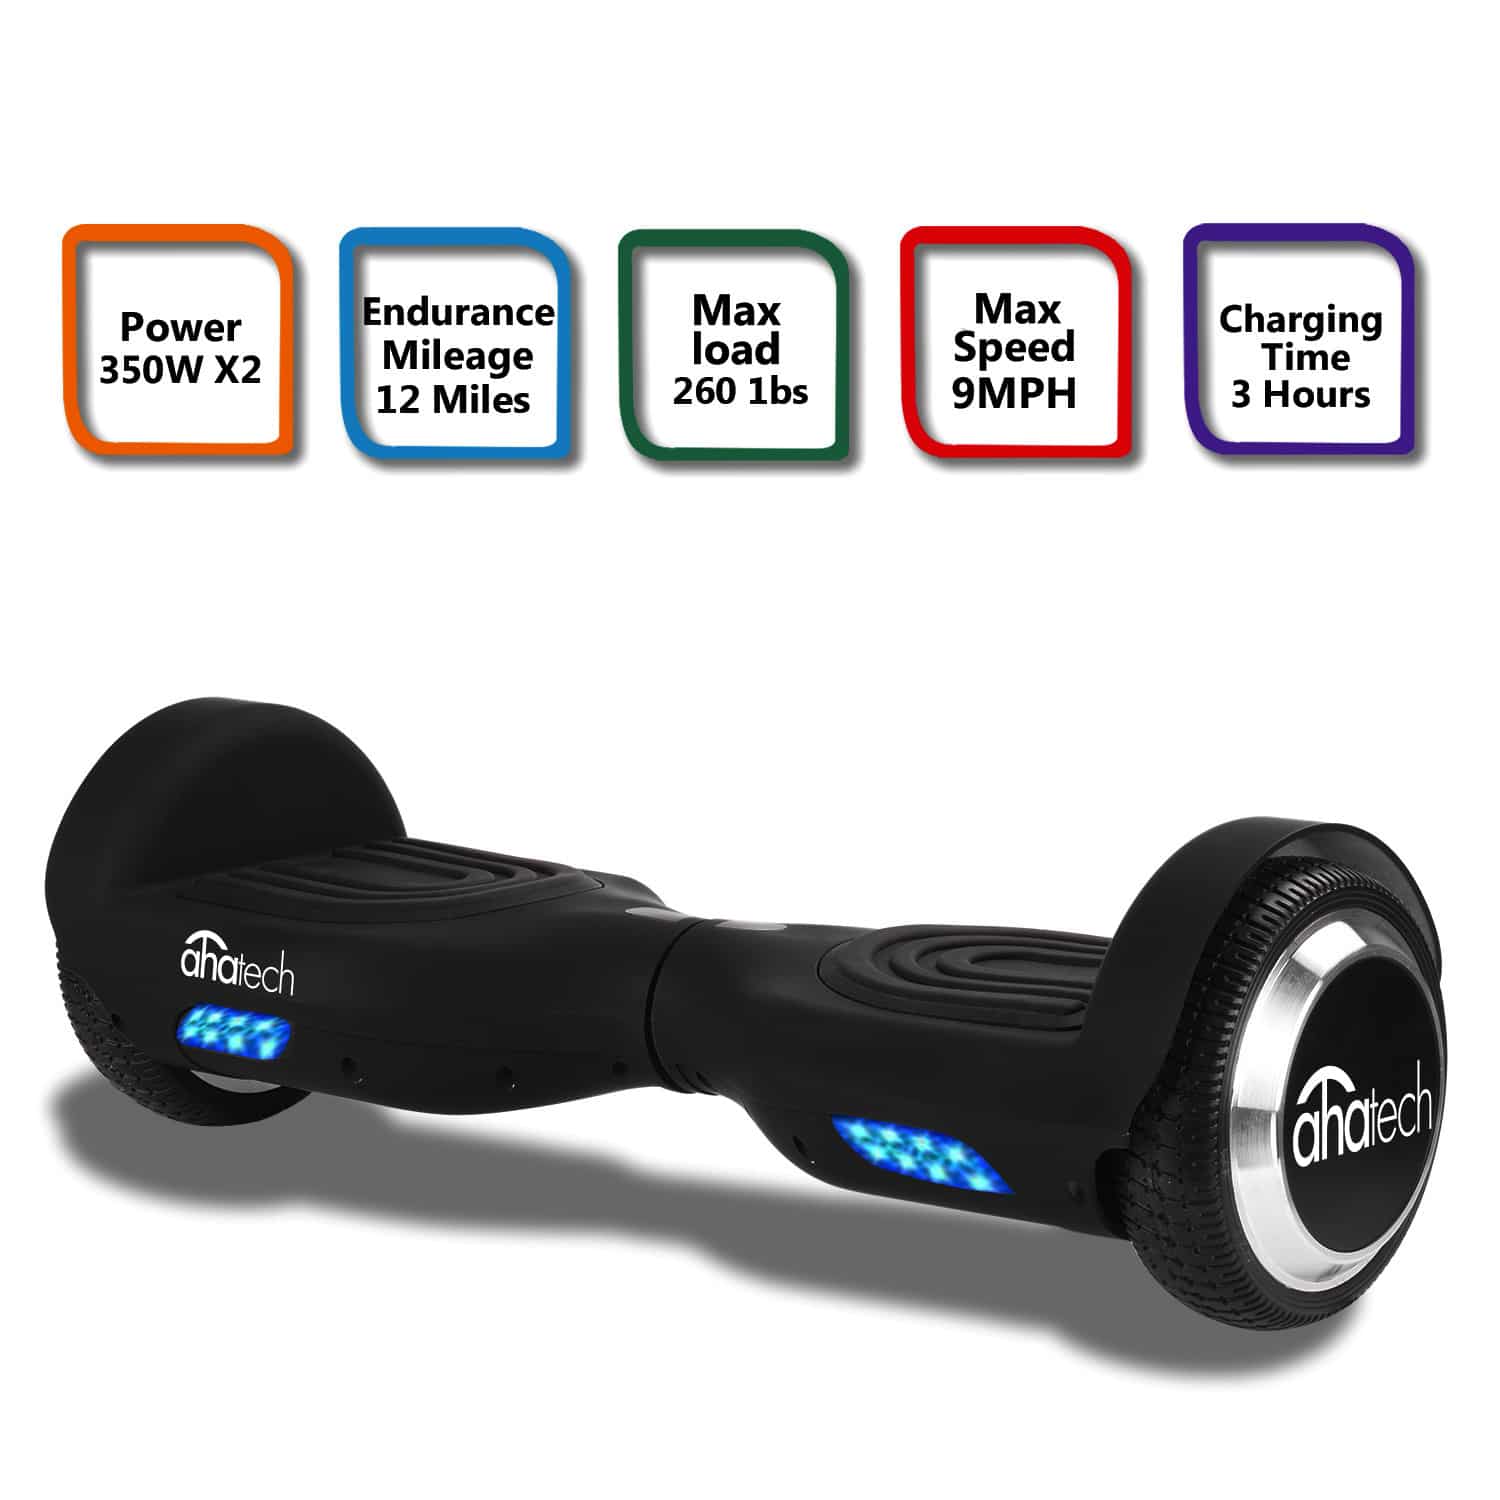 Hoverboard Electric Scooter Features